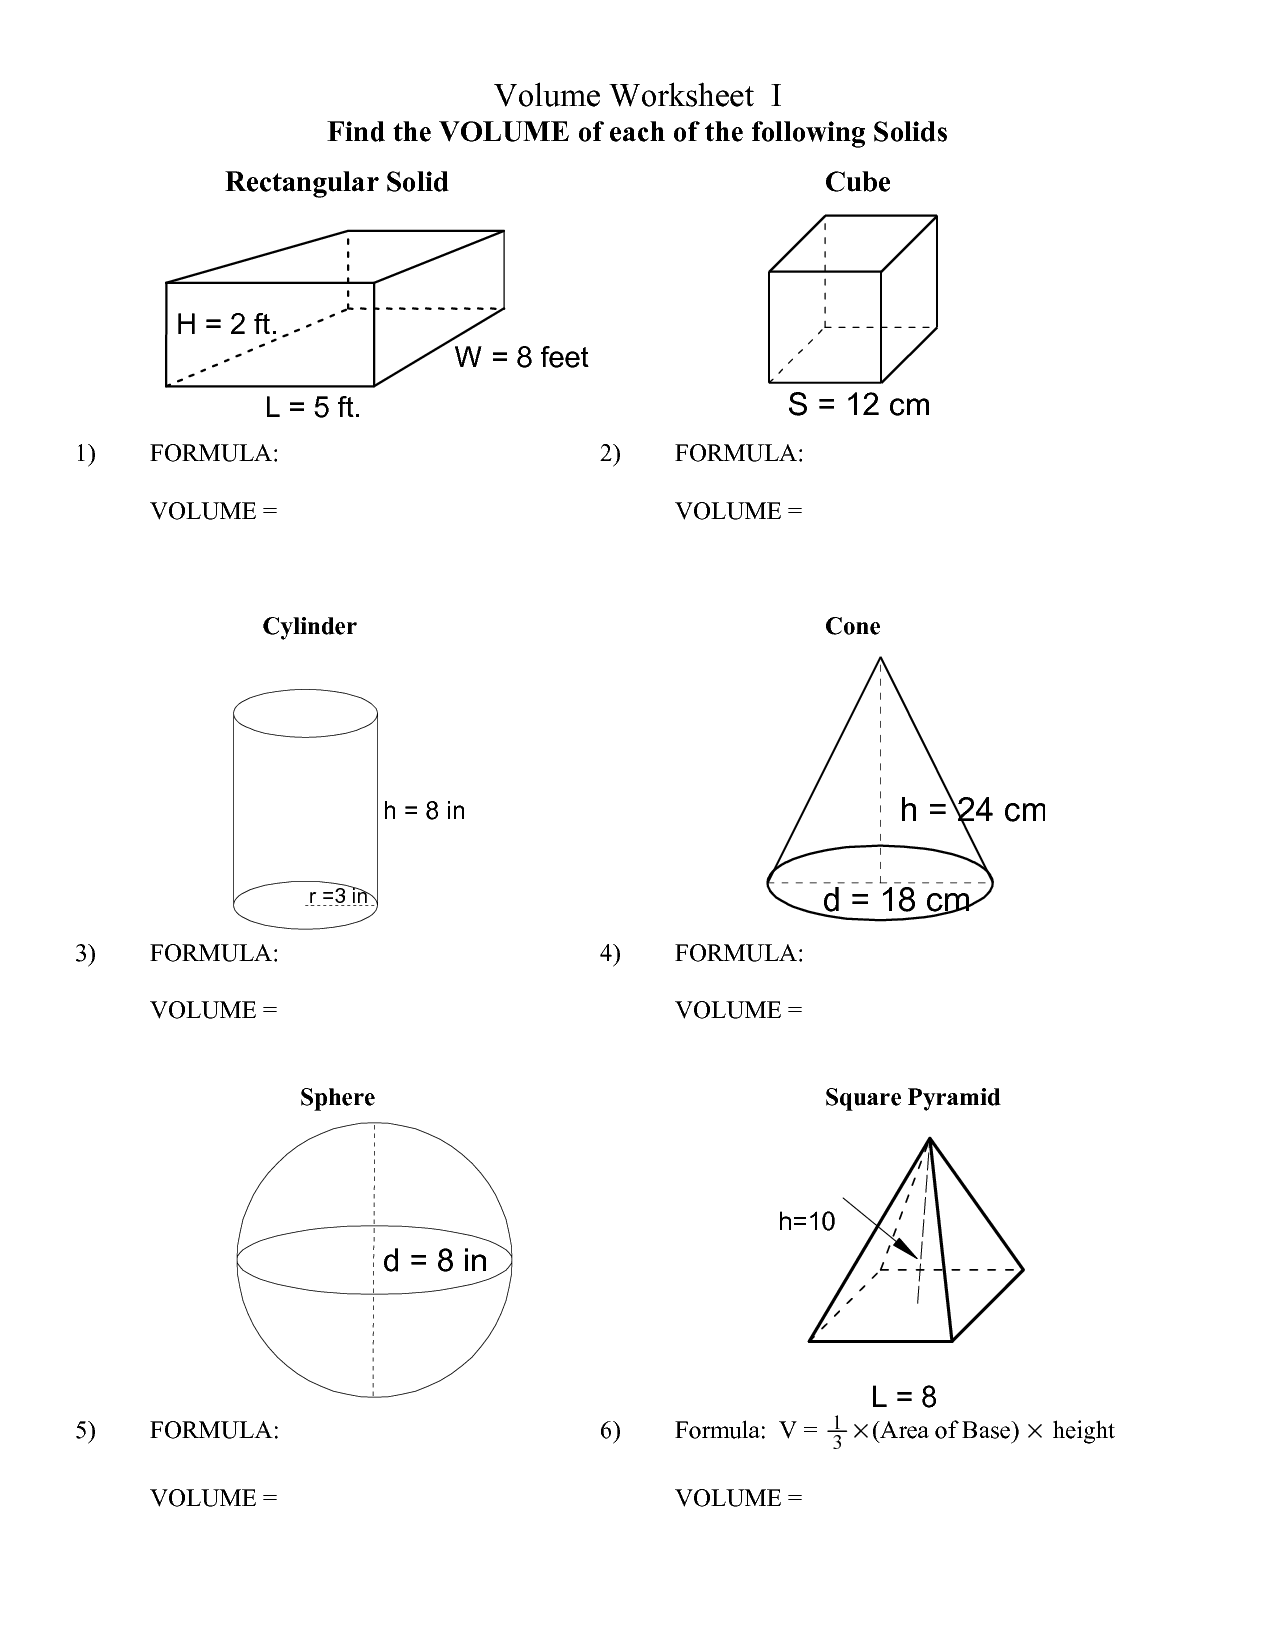 14-best-images-of-prisms-and-pyramids-describe-worksheets-surface-area-and-volume-of-cones